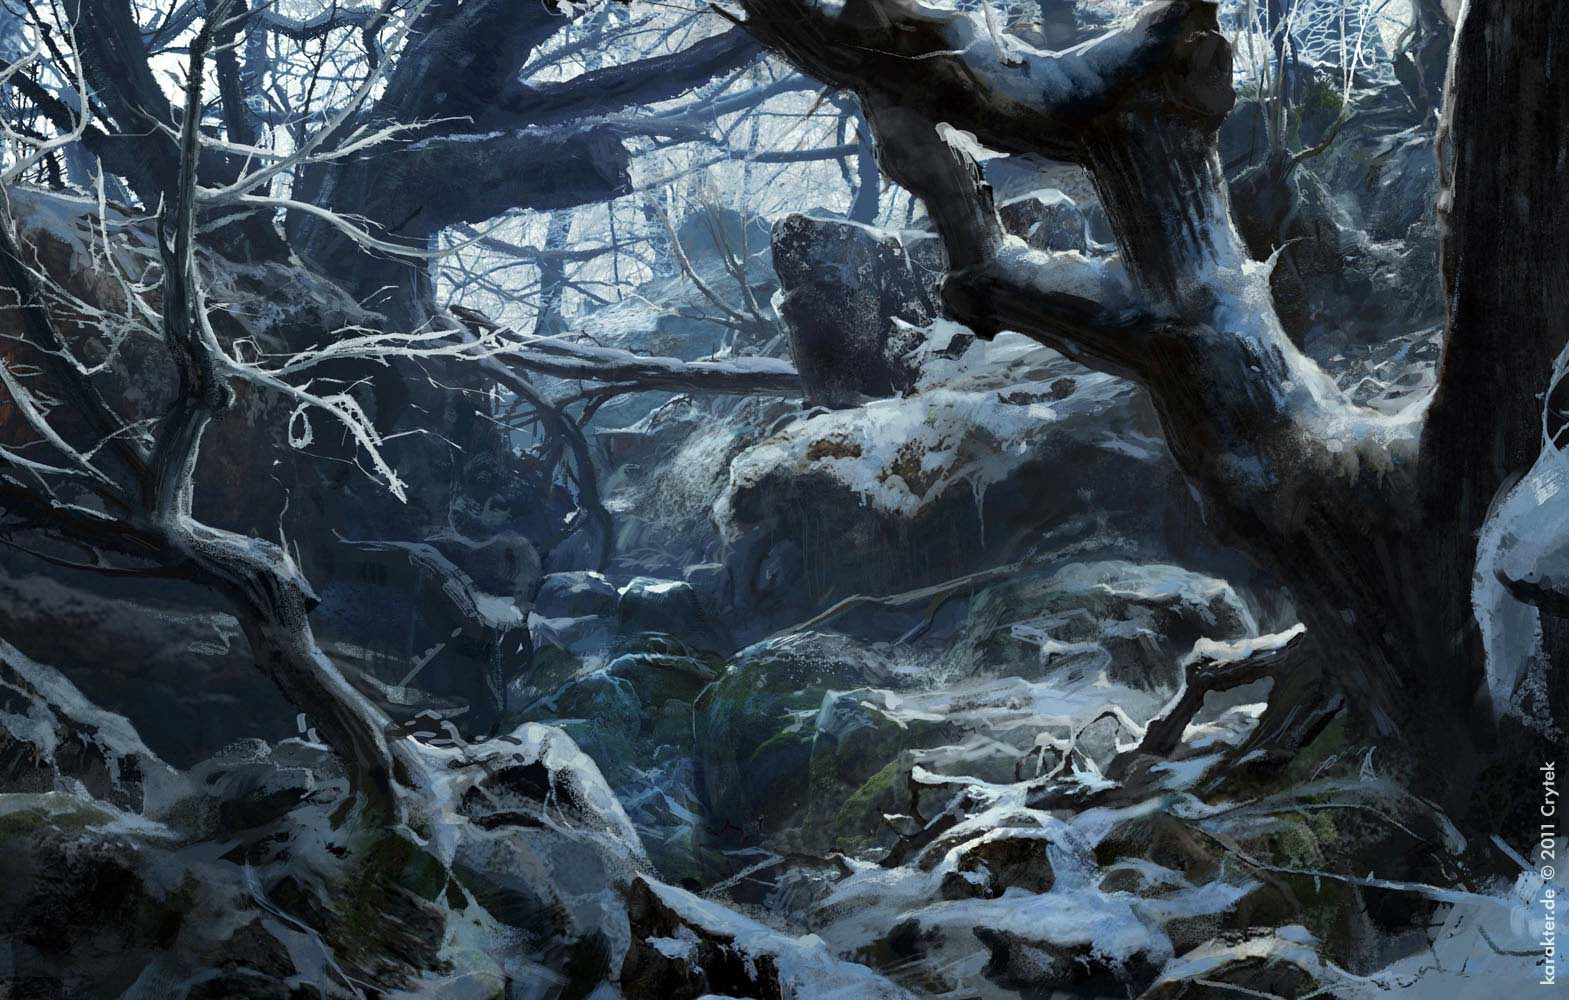 Fine Art: Game Of Thrones Artists Take On Xbox One Launch Game